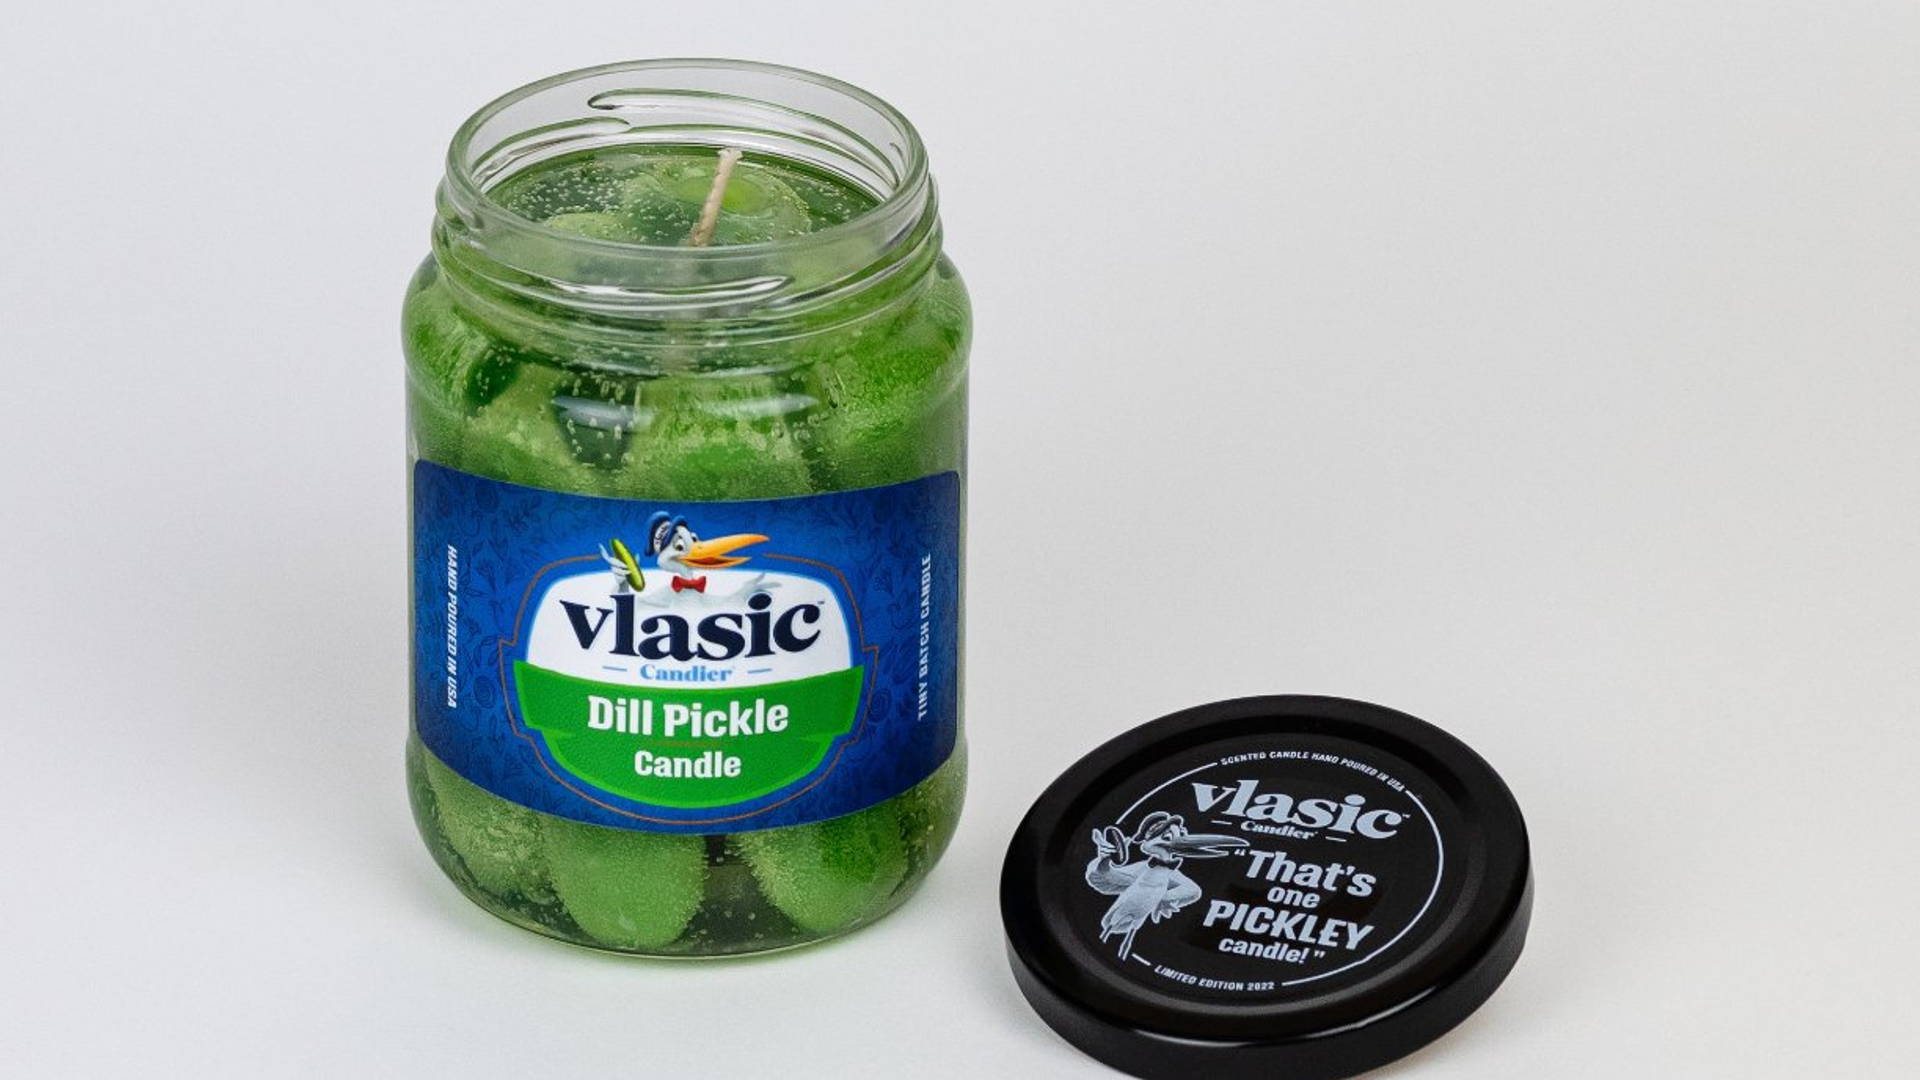 Featured image for Vlasic and Candier By Ryan Porter Create The Perfect Candle For Pickle Lovers